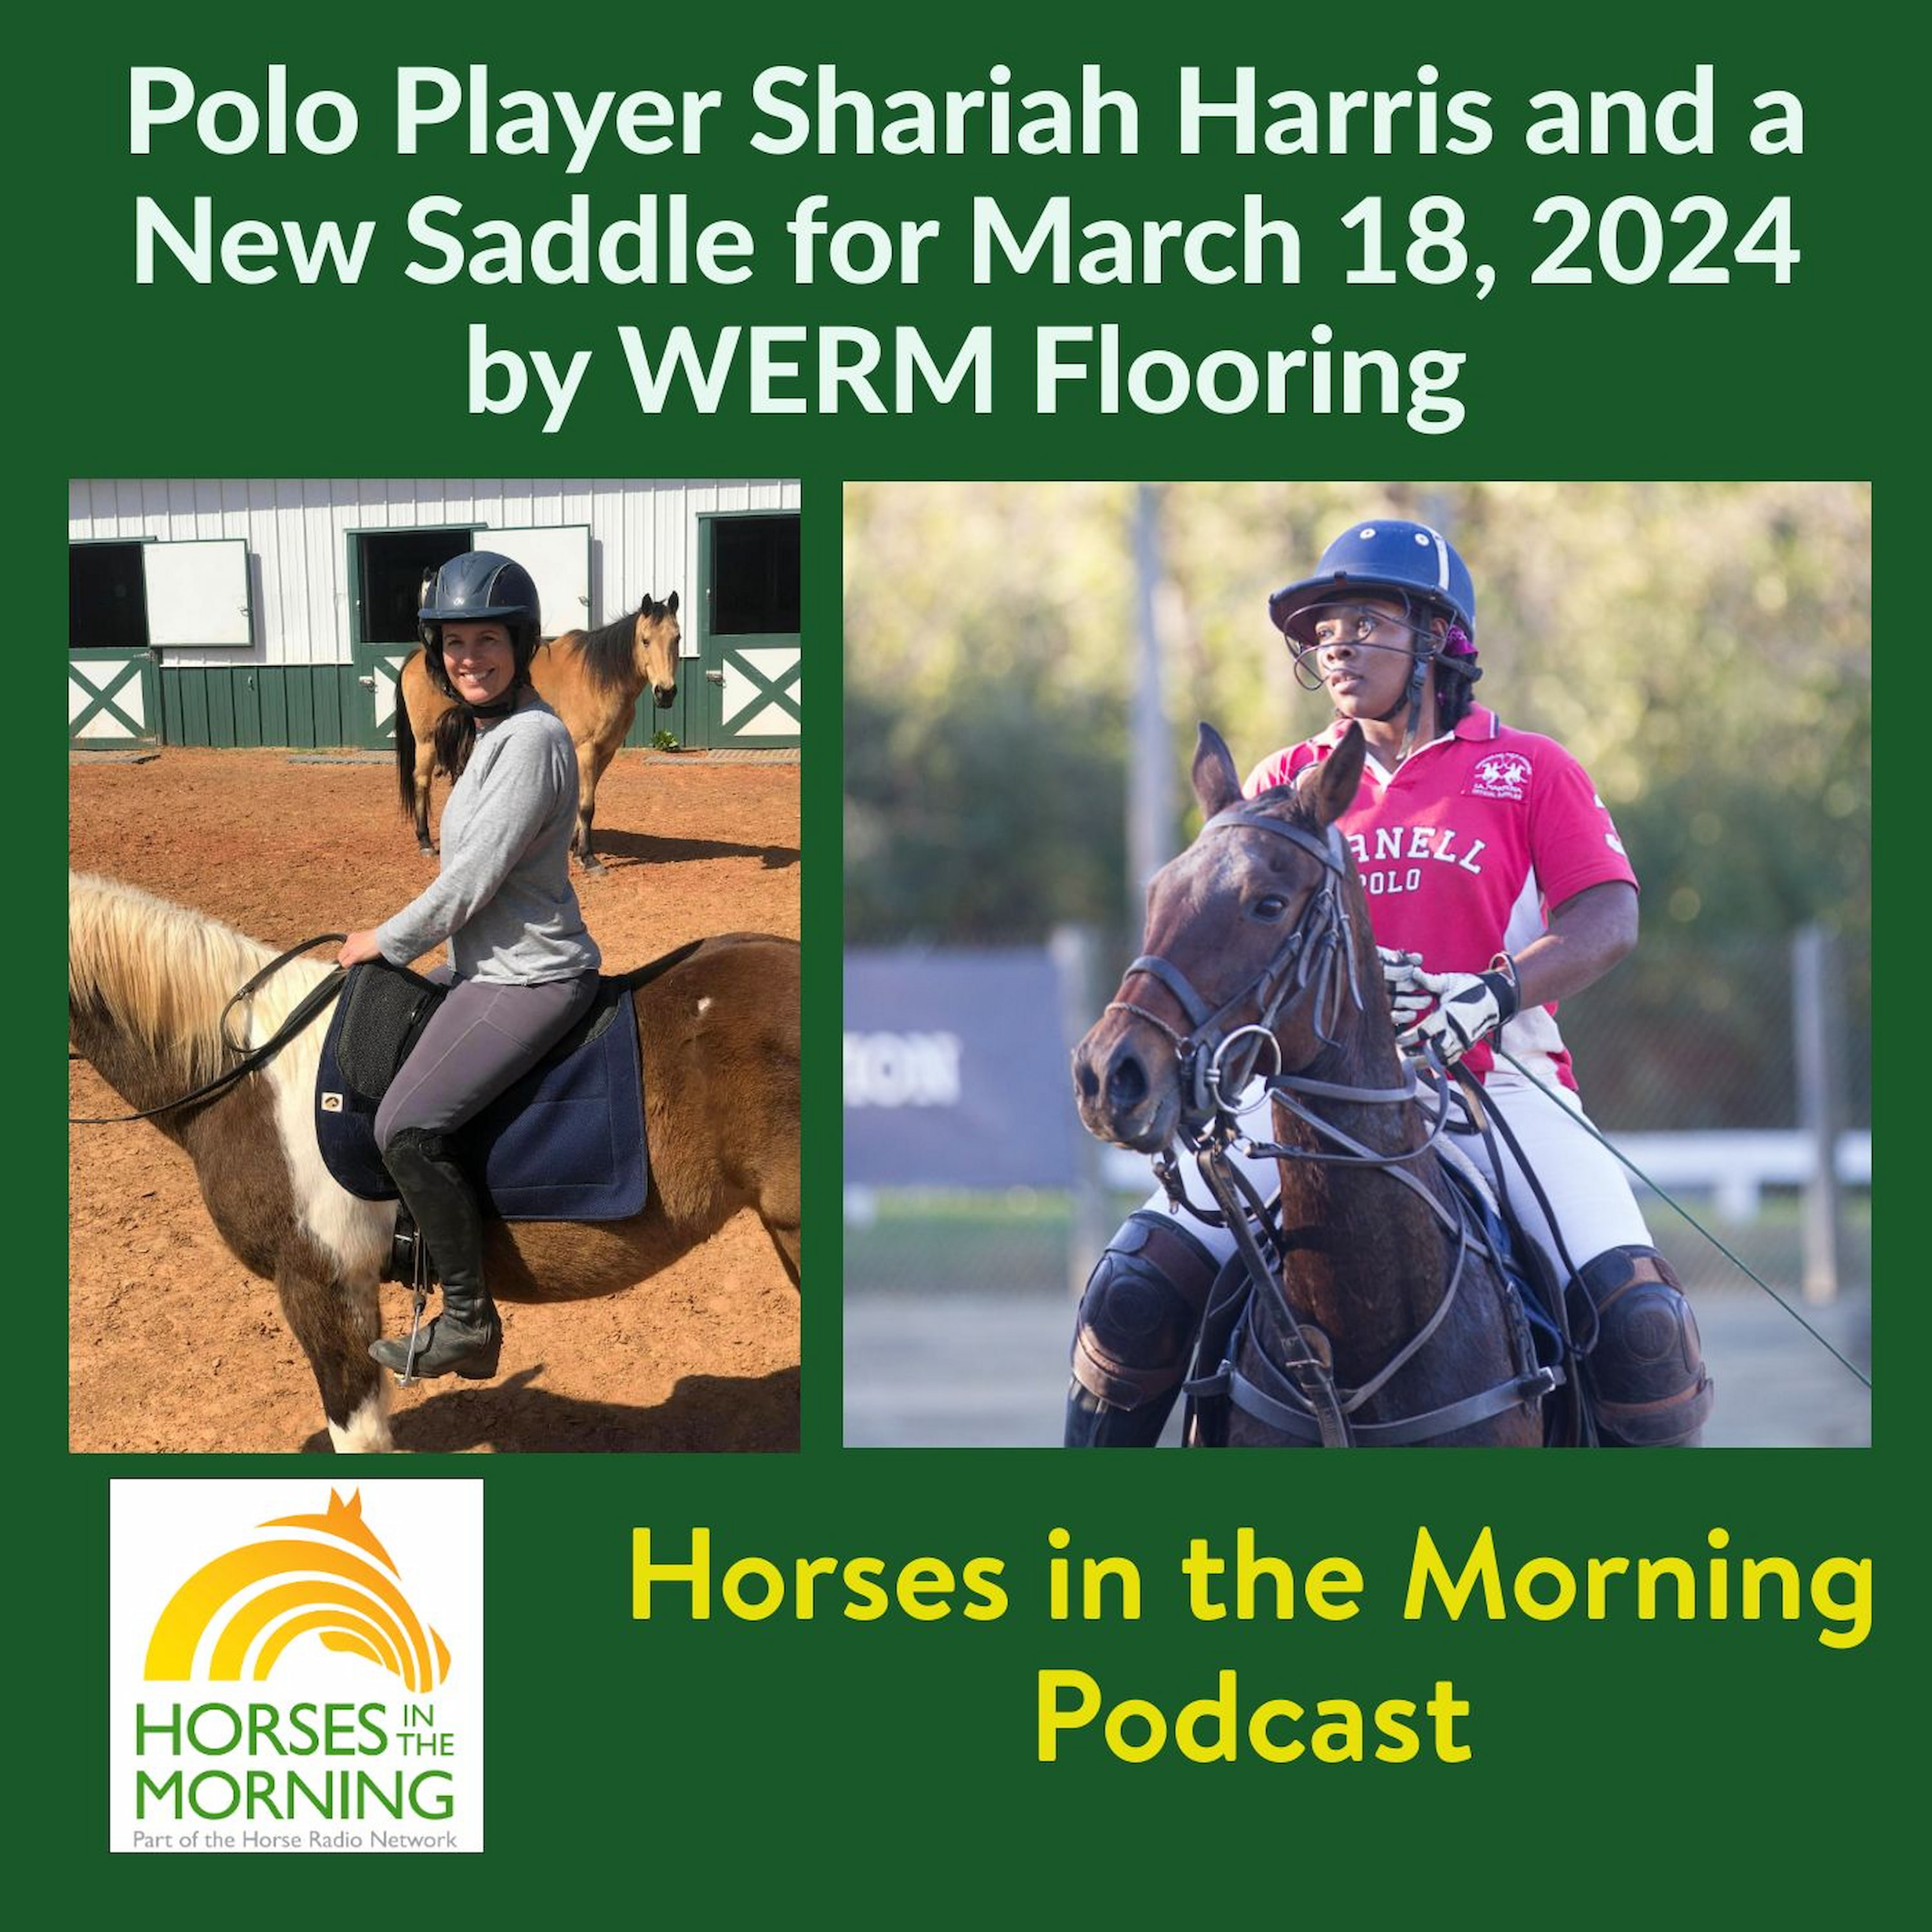 Polo Player Shariah Harris and a New Saddle for March 18, 2024 by WERM Flooring